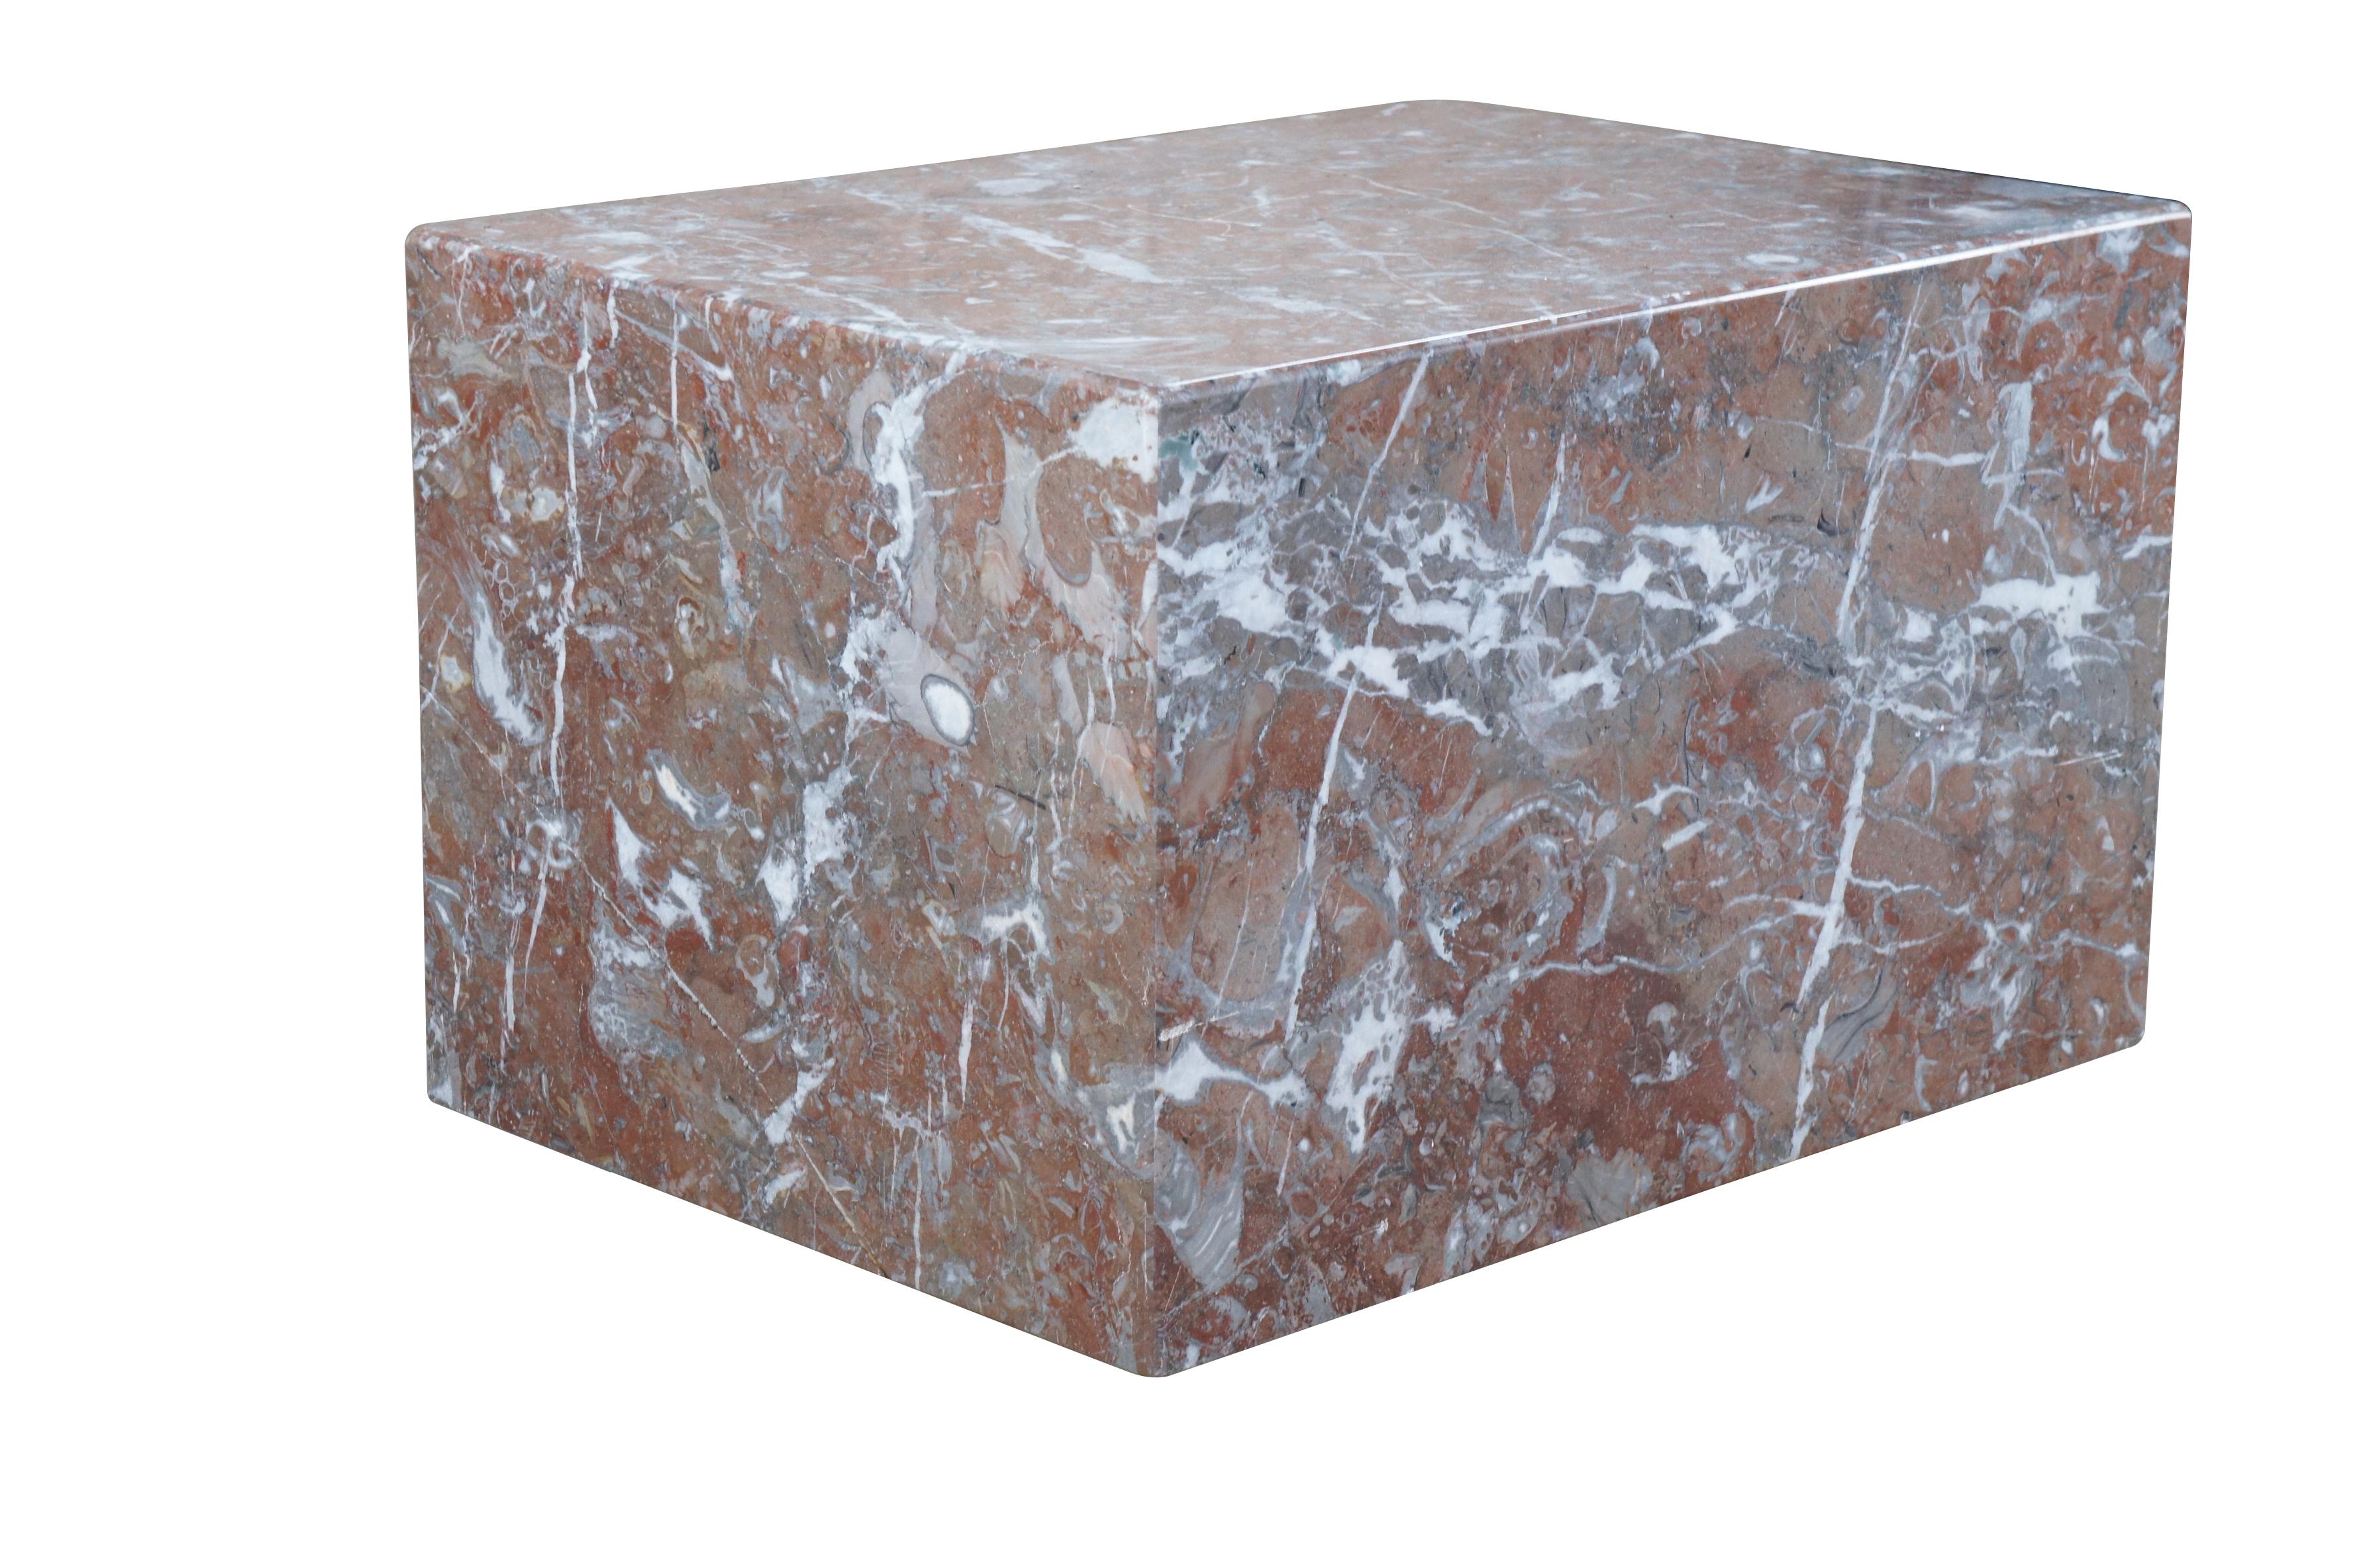 Italian minimalist cube form plinth, circa 1970s. Made from marble with pink and grey color.  The perfect base to display any heavy object, sculpture or statue. Can also be used as an end, side or coffee table.  The plinth is extremely heavy.  2